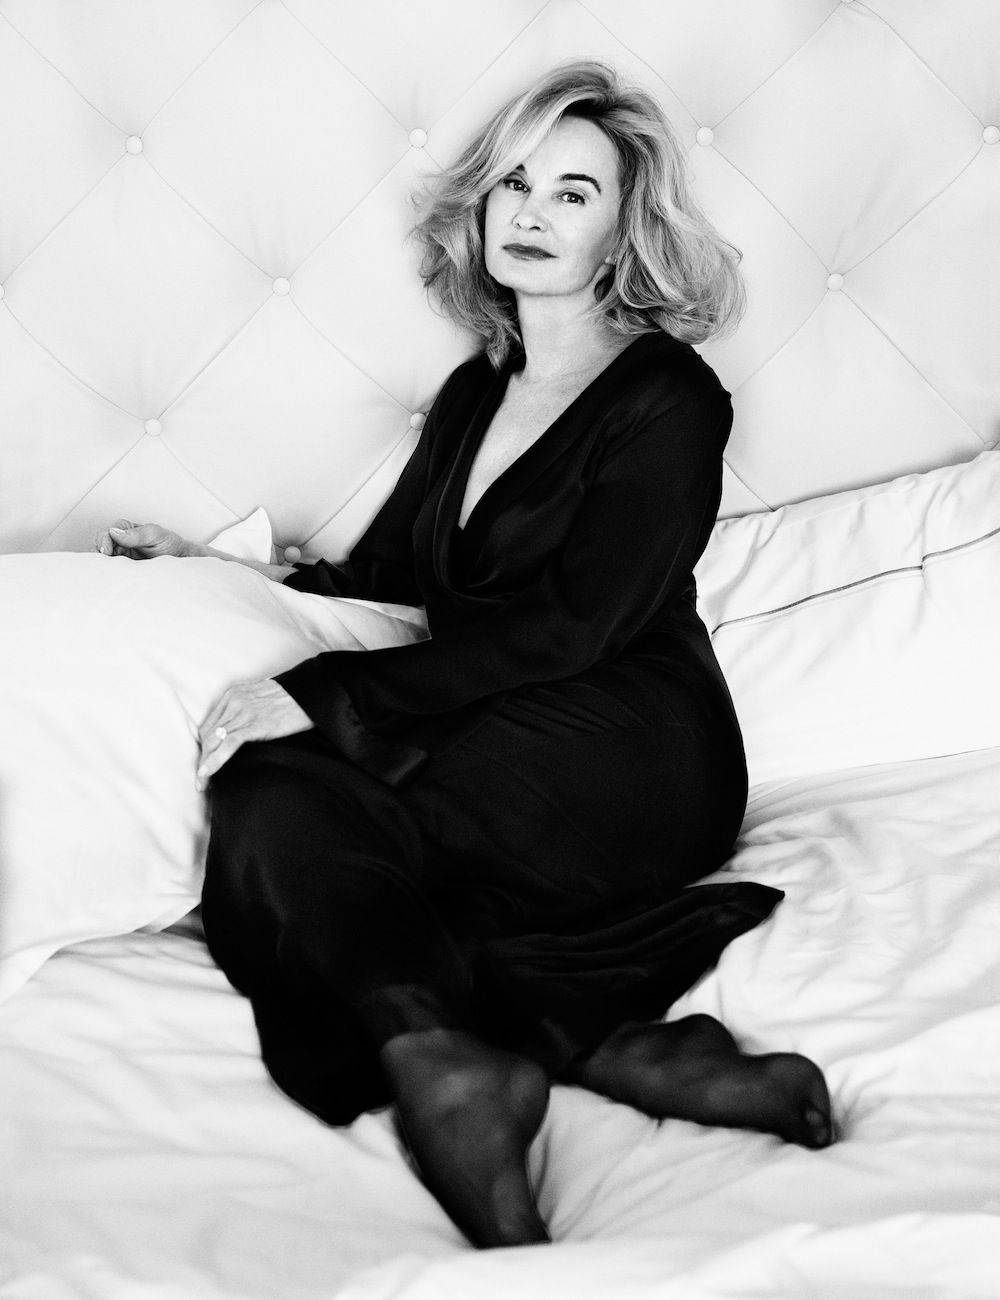 Jessicalange I Sängen. (note: This Sentence Doesn't Really Make Sense In Swedish In The Context Of Computer Or Mobile Wallpaper. If You Could Provide More Information About What You'd Like To Say, I Could Help With A More Appropriate Translation!) Wallpaper